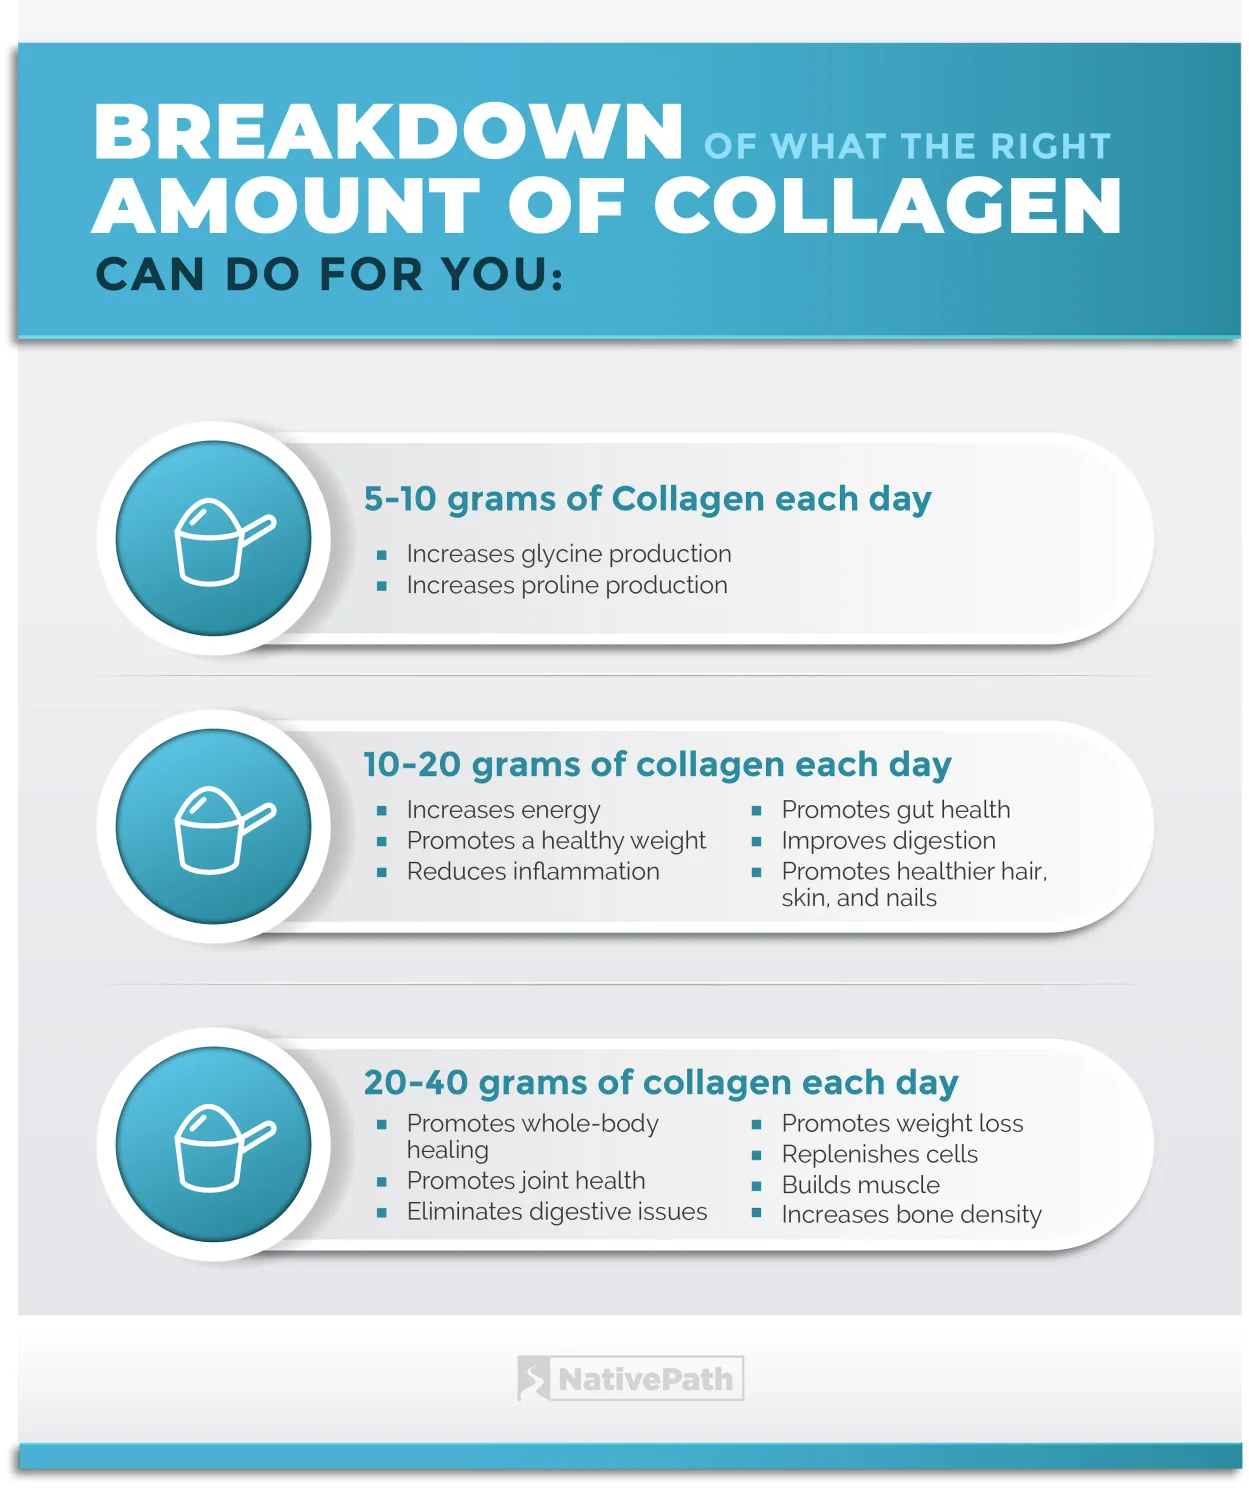 Infographic Showing the Breakdown of What the Right Amount of Collagen Can Do for You